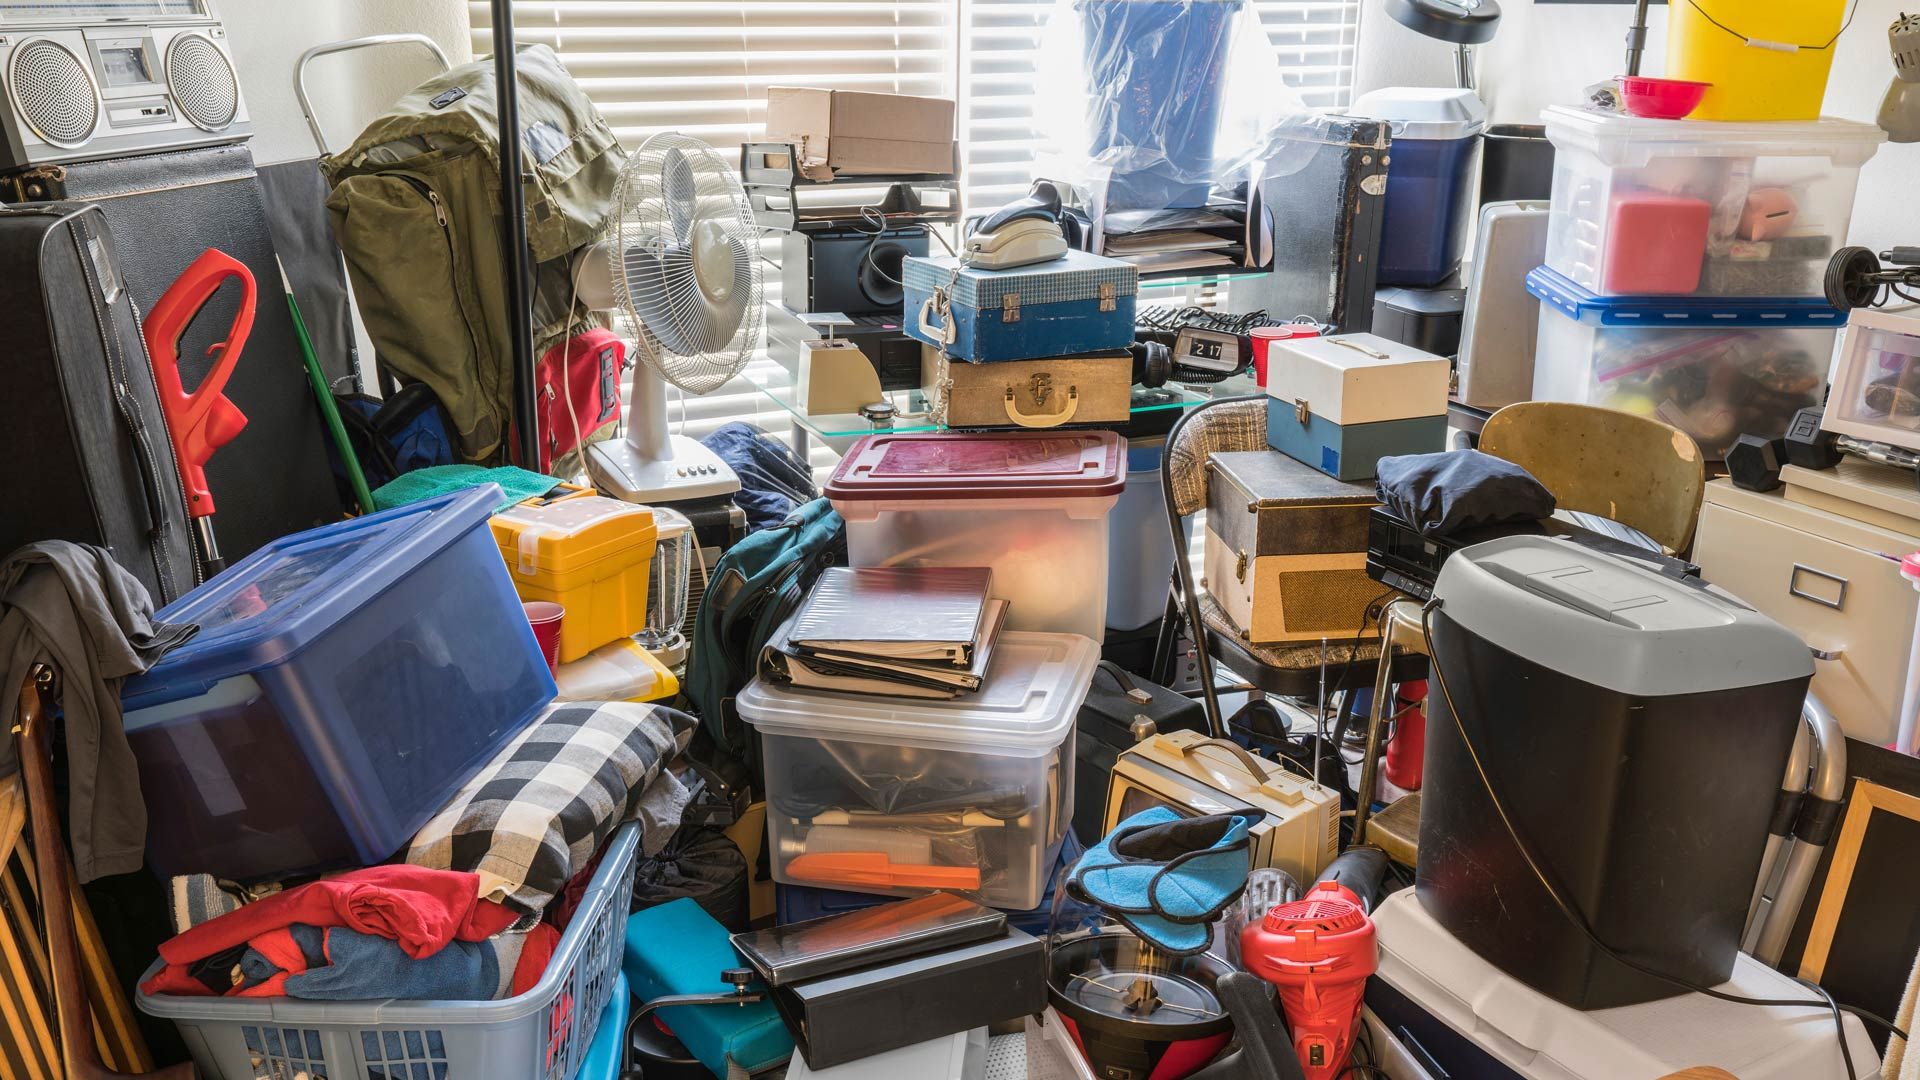 Hoarding 101: Hoarding Reality vs. What You See on TV